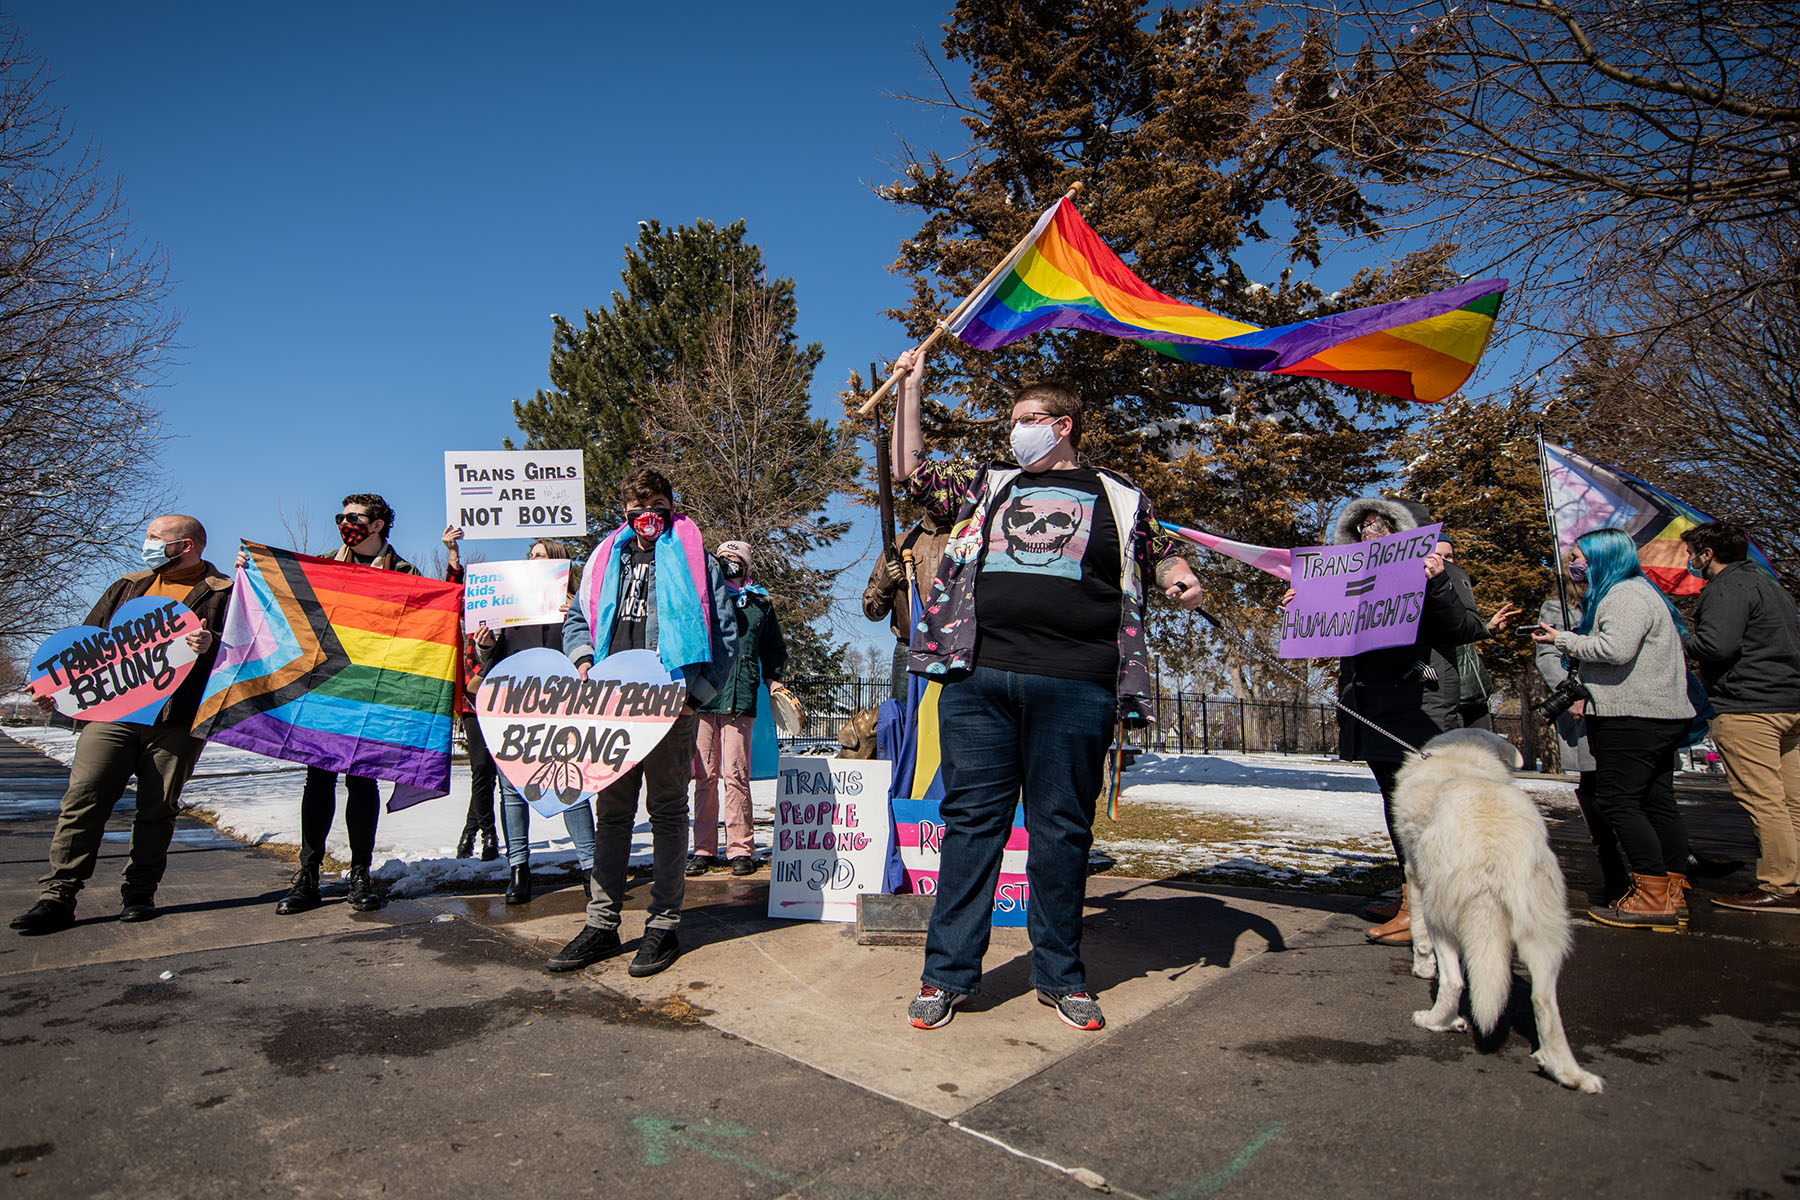 People waving flags and signs protest anti-trans bill in Pierre, South Dakota.